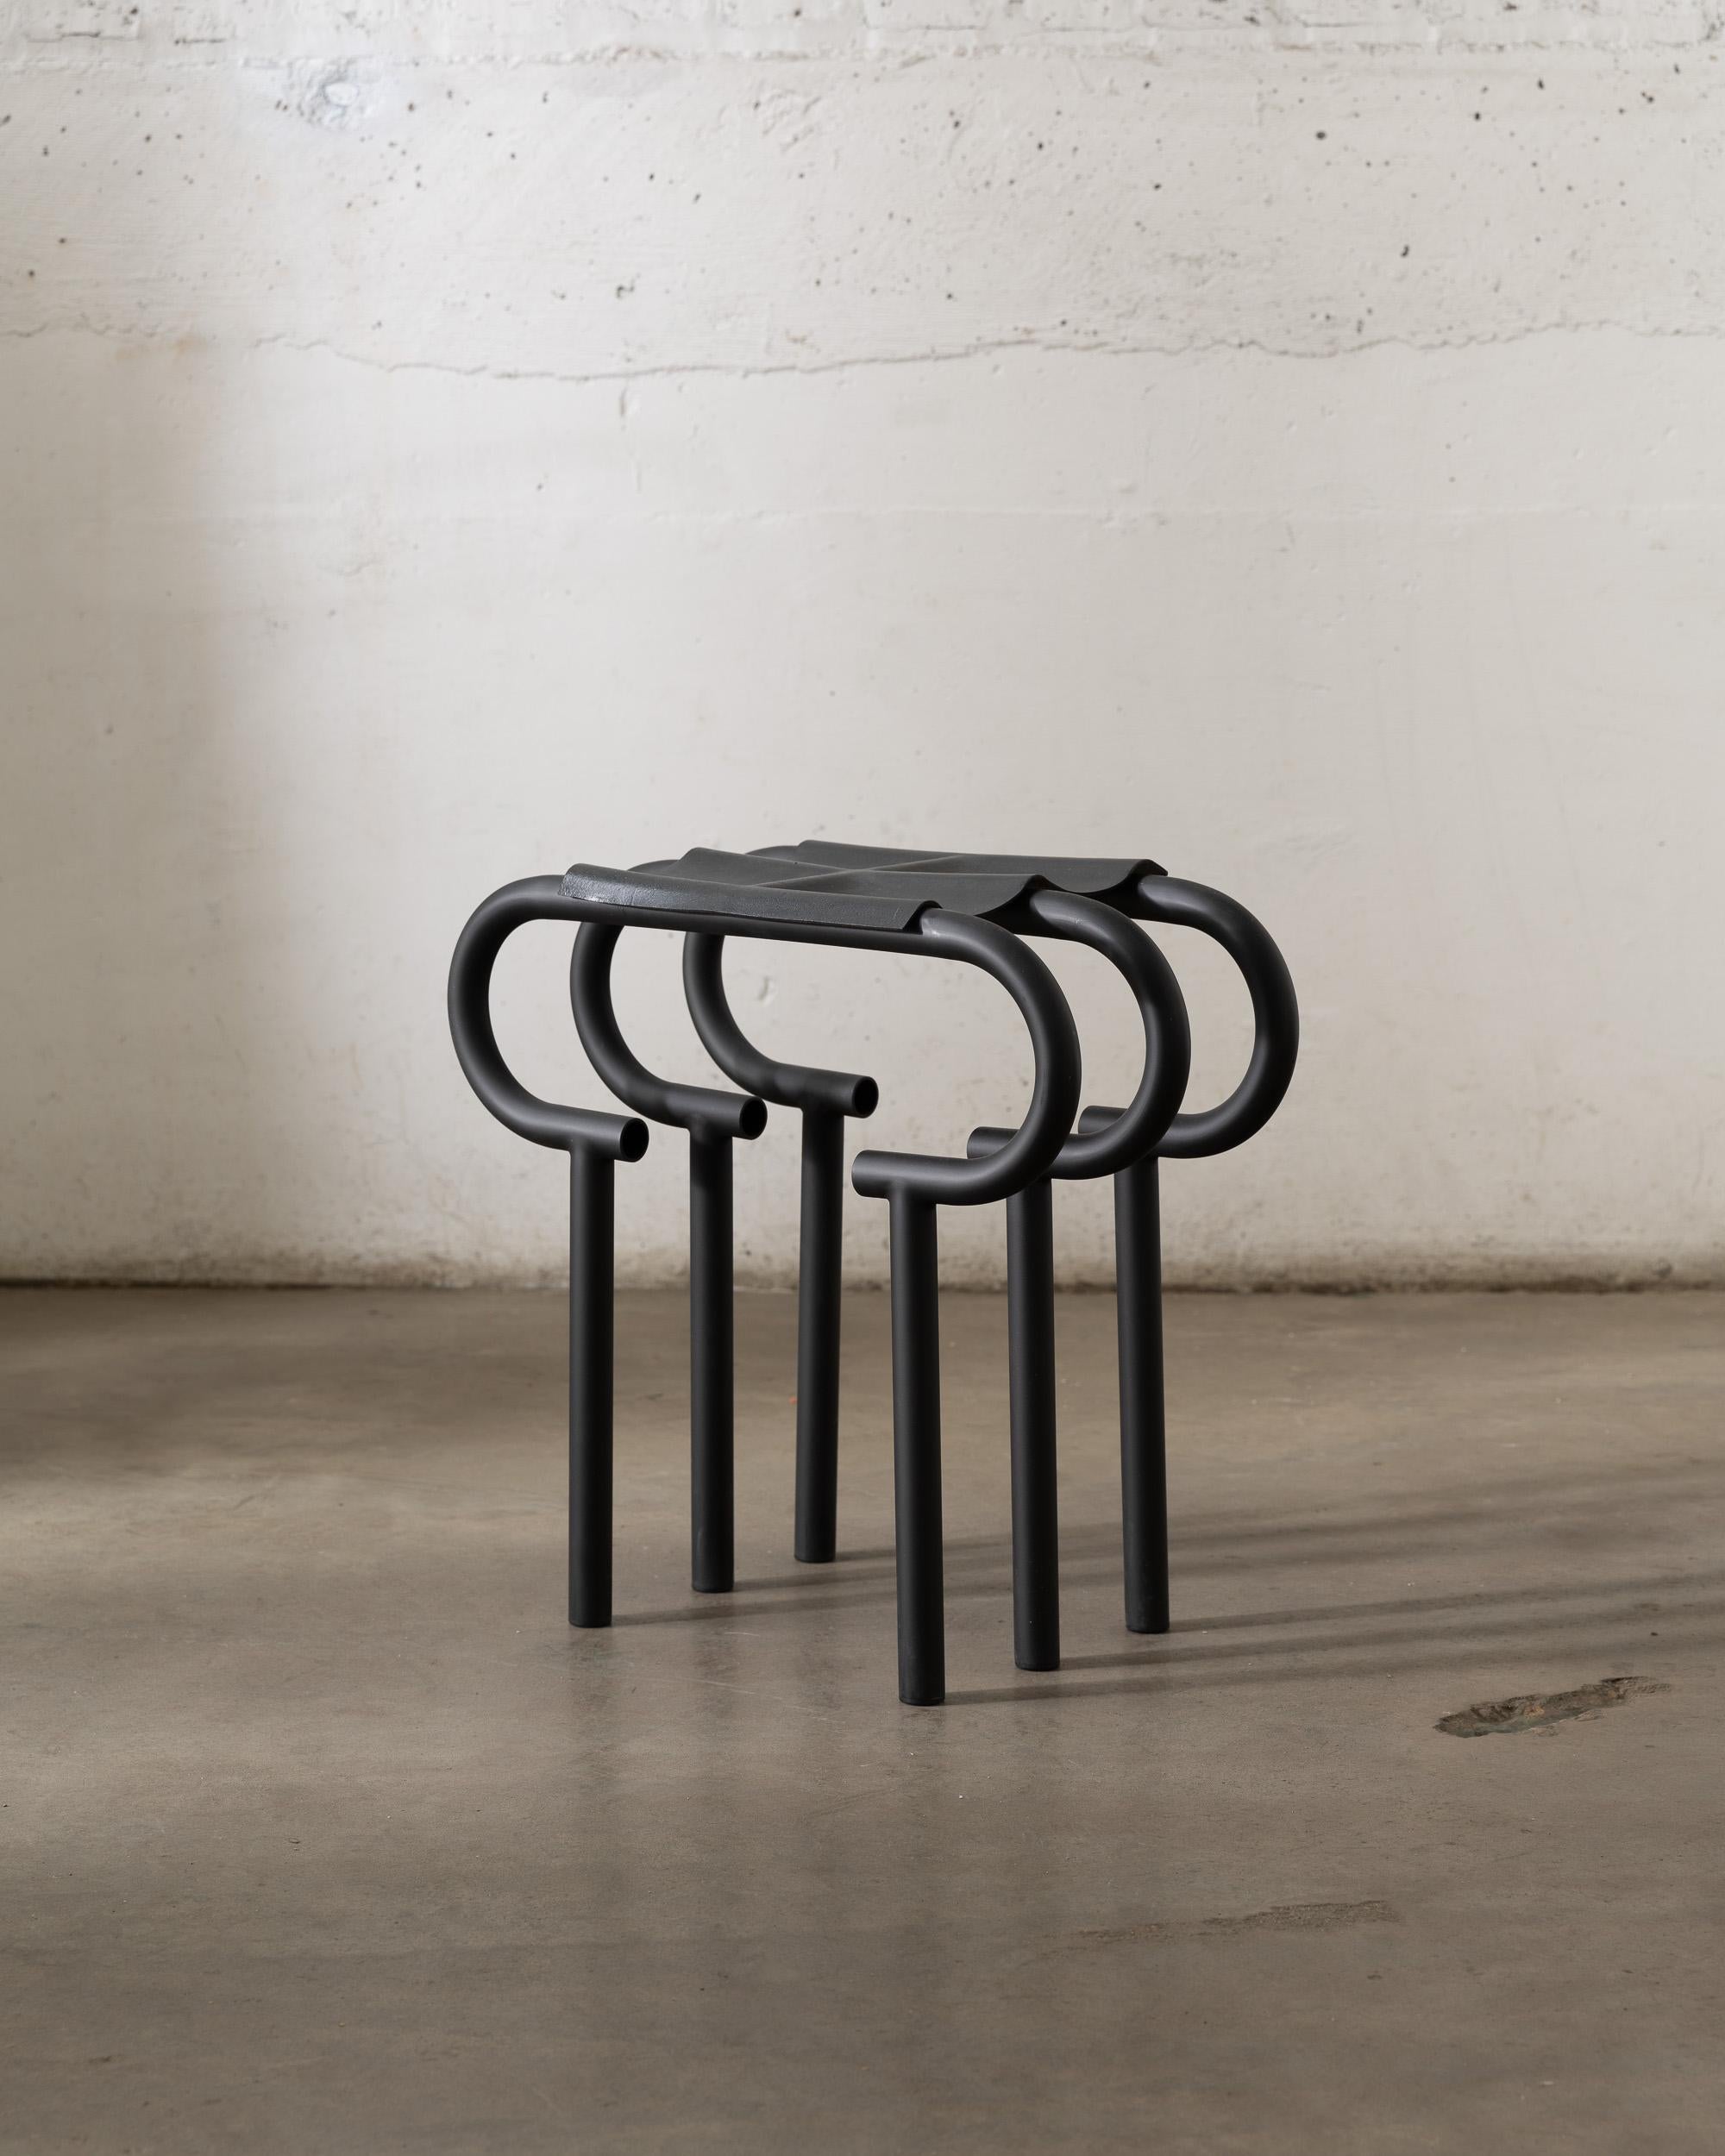 Slumped leather stool by Gentner Design.
Dimensions: D 46 x W 25.5 x H 46 cm.
Materials: steel, leather.

Gentner Design
Rooted in a language of sculpture, character defining details, and world renowned craftsmanship, the work is found at the